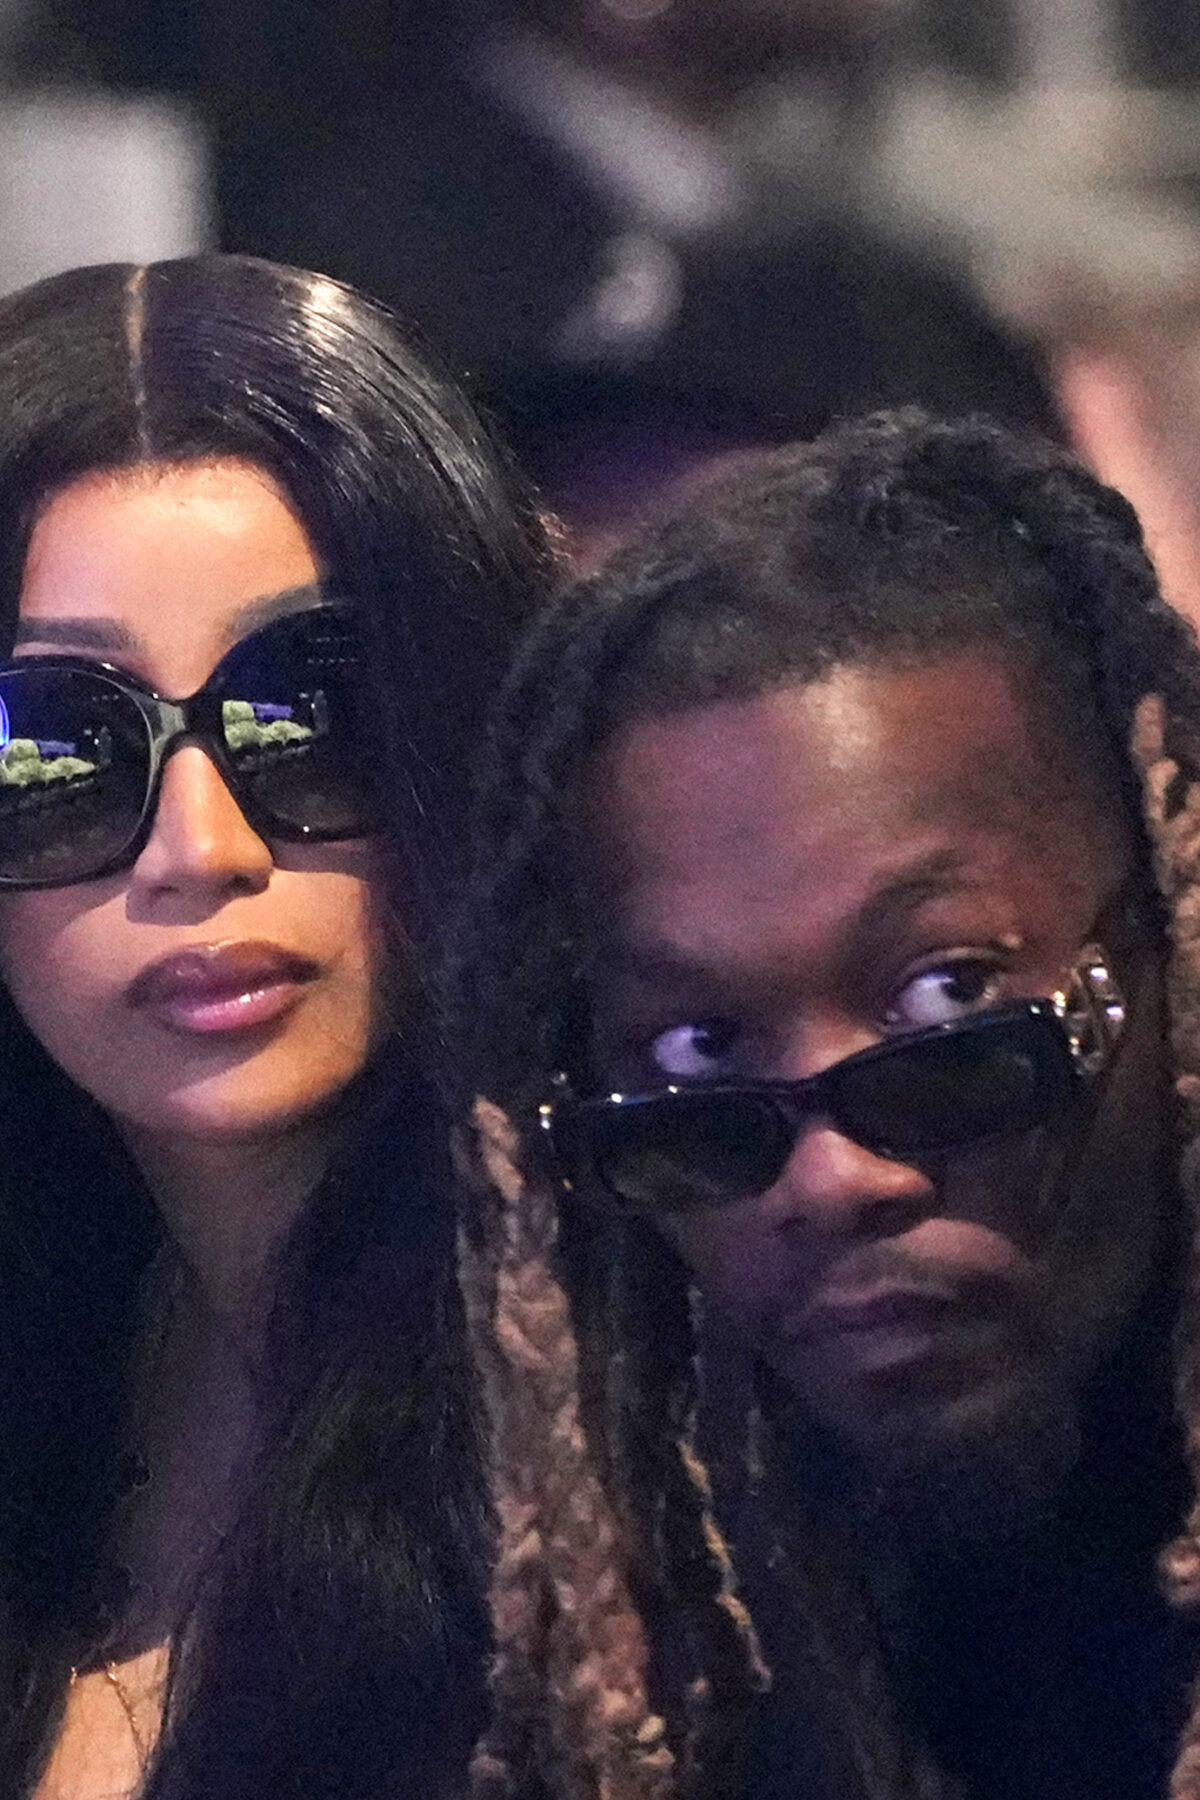 ATLANTA, GEORGIA - NOVEMBER 11: *EXCLUSIVE COVERAGE* Cardi B and Offset attends Takeoff's Celebration of Life at State Farm Arena on November 11, 2022 in Atlanta, Georgia. (Photo by Kevin Mazur/Getty Images for TVG)